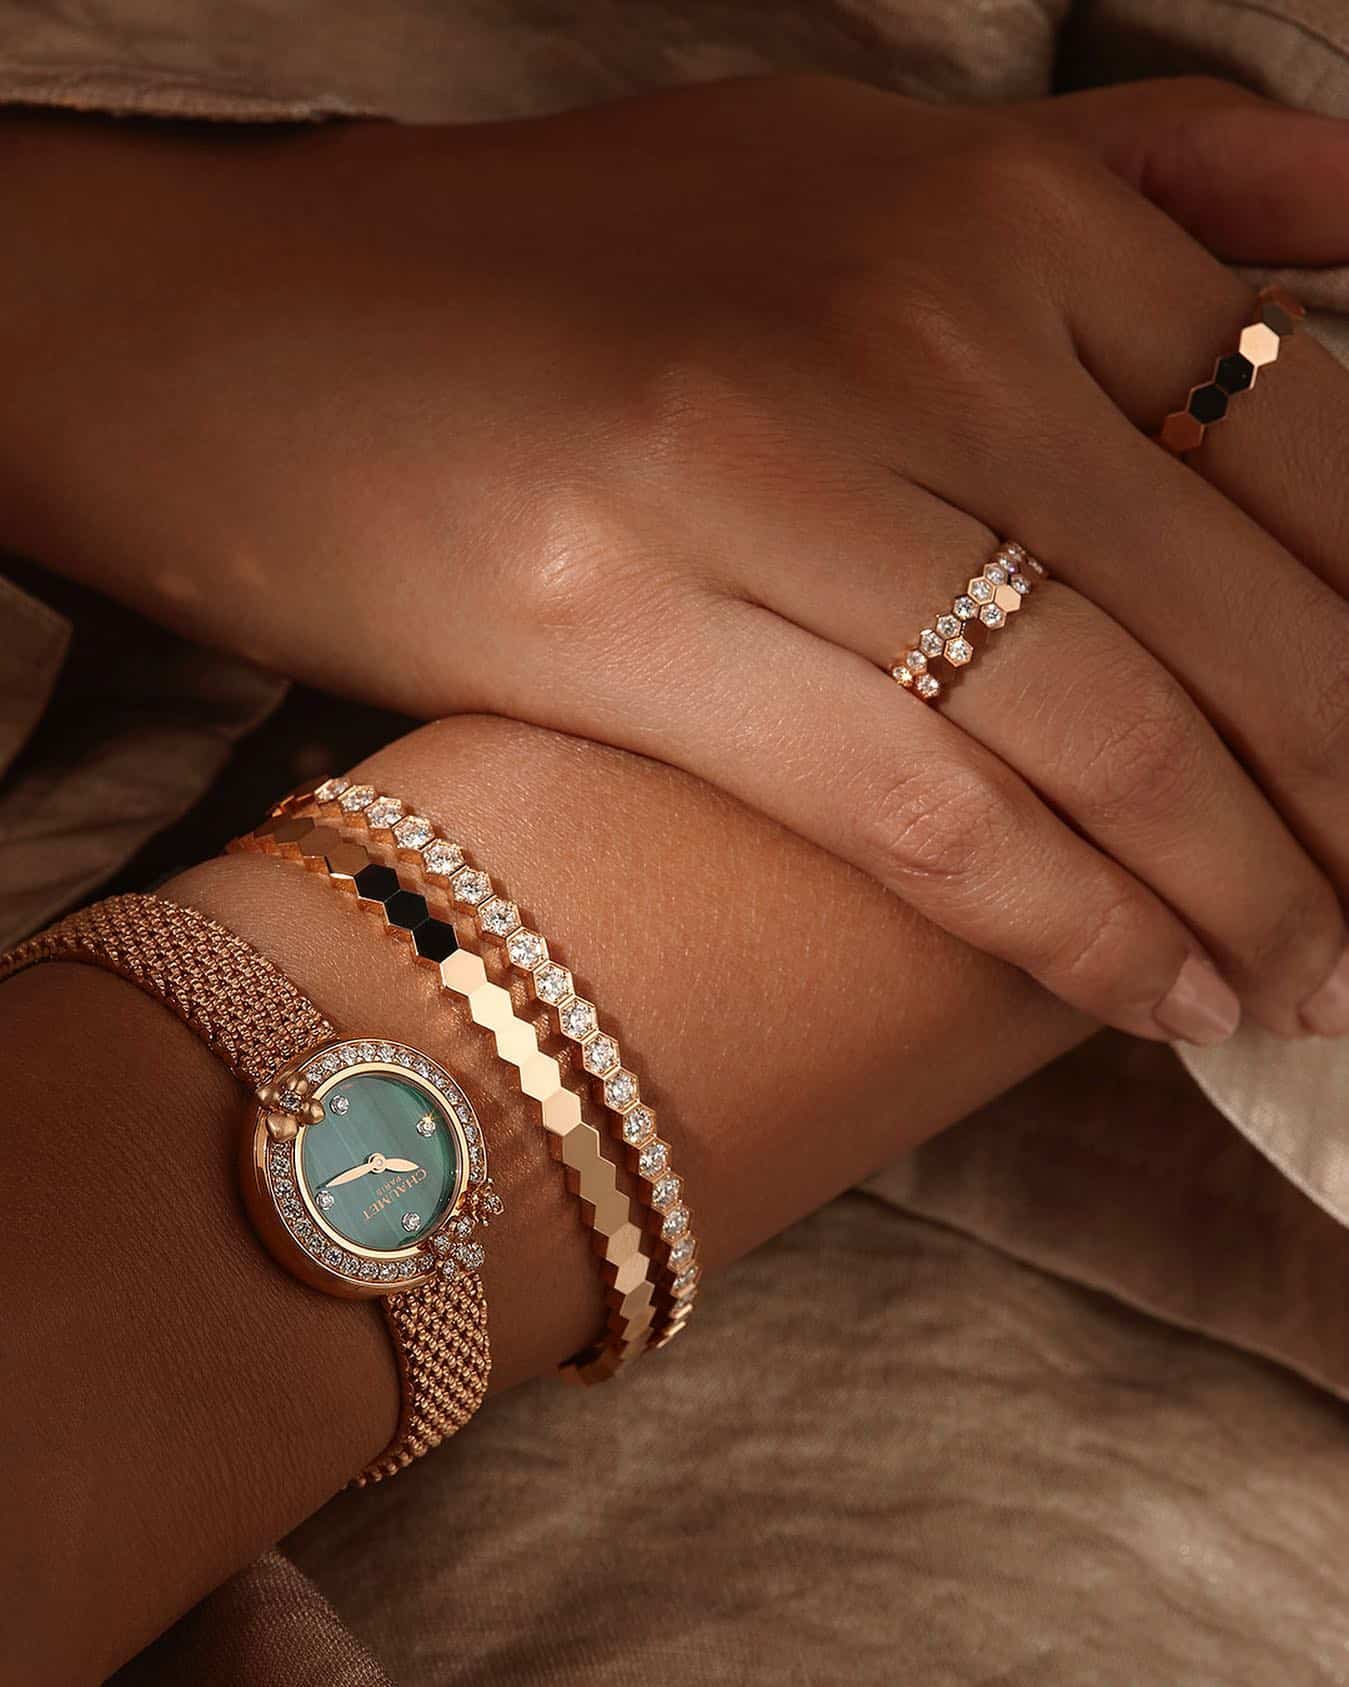 Chaumet be my Love collection quiet luxury